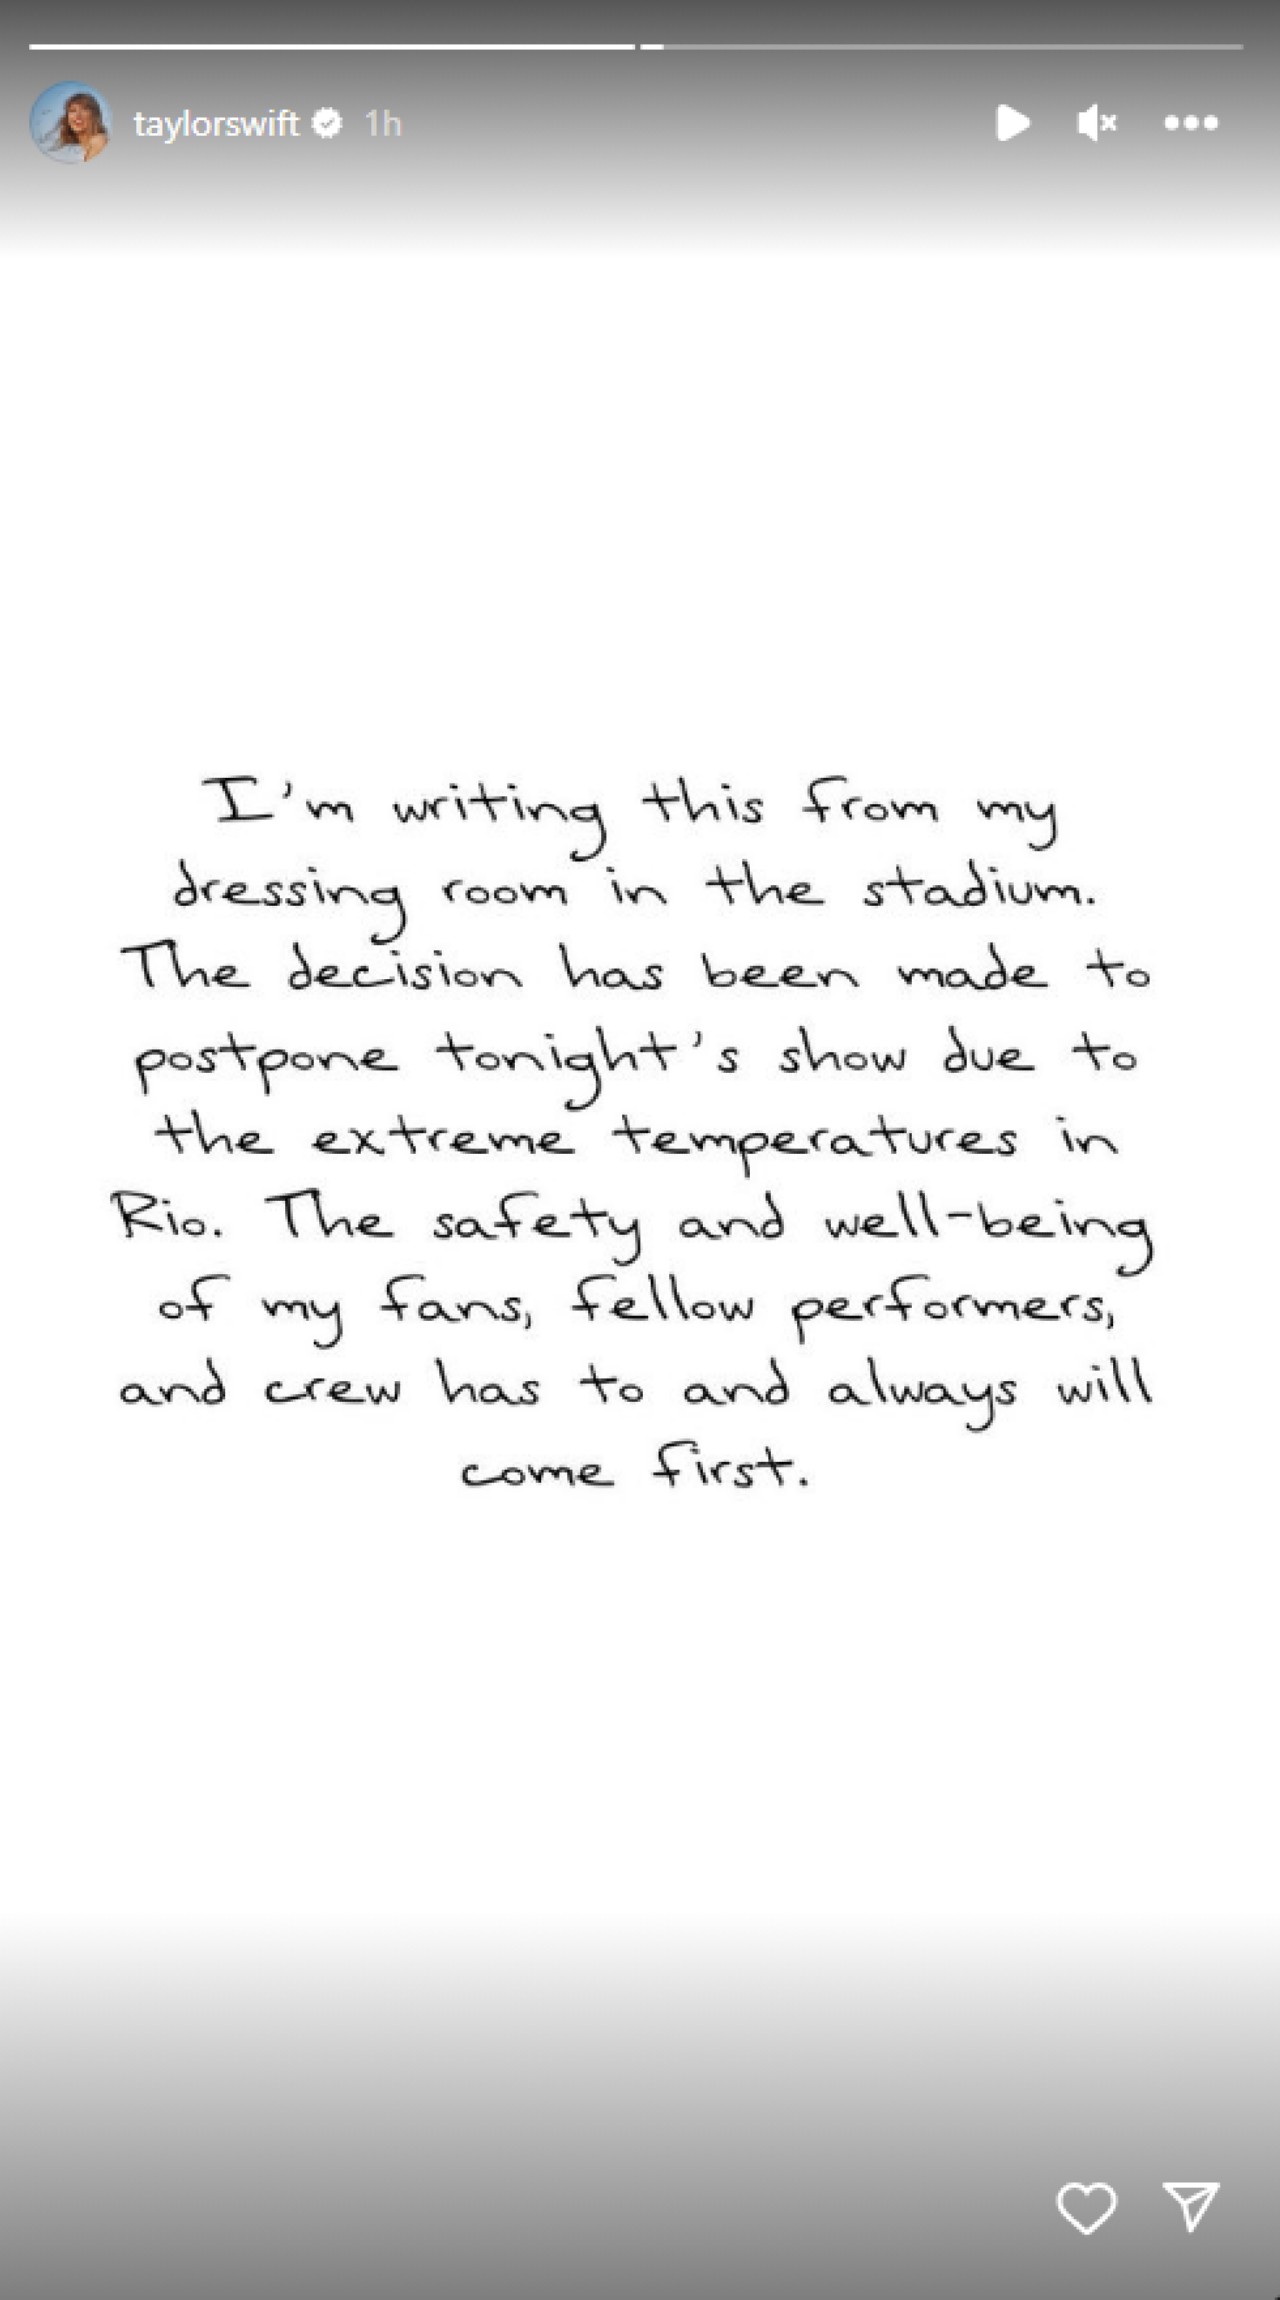 Taylor Swift posts statement about postponing her second show in Rio.